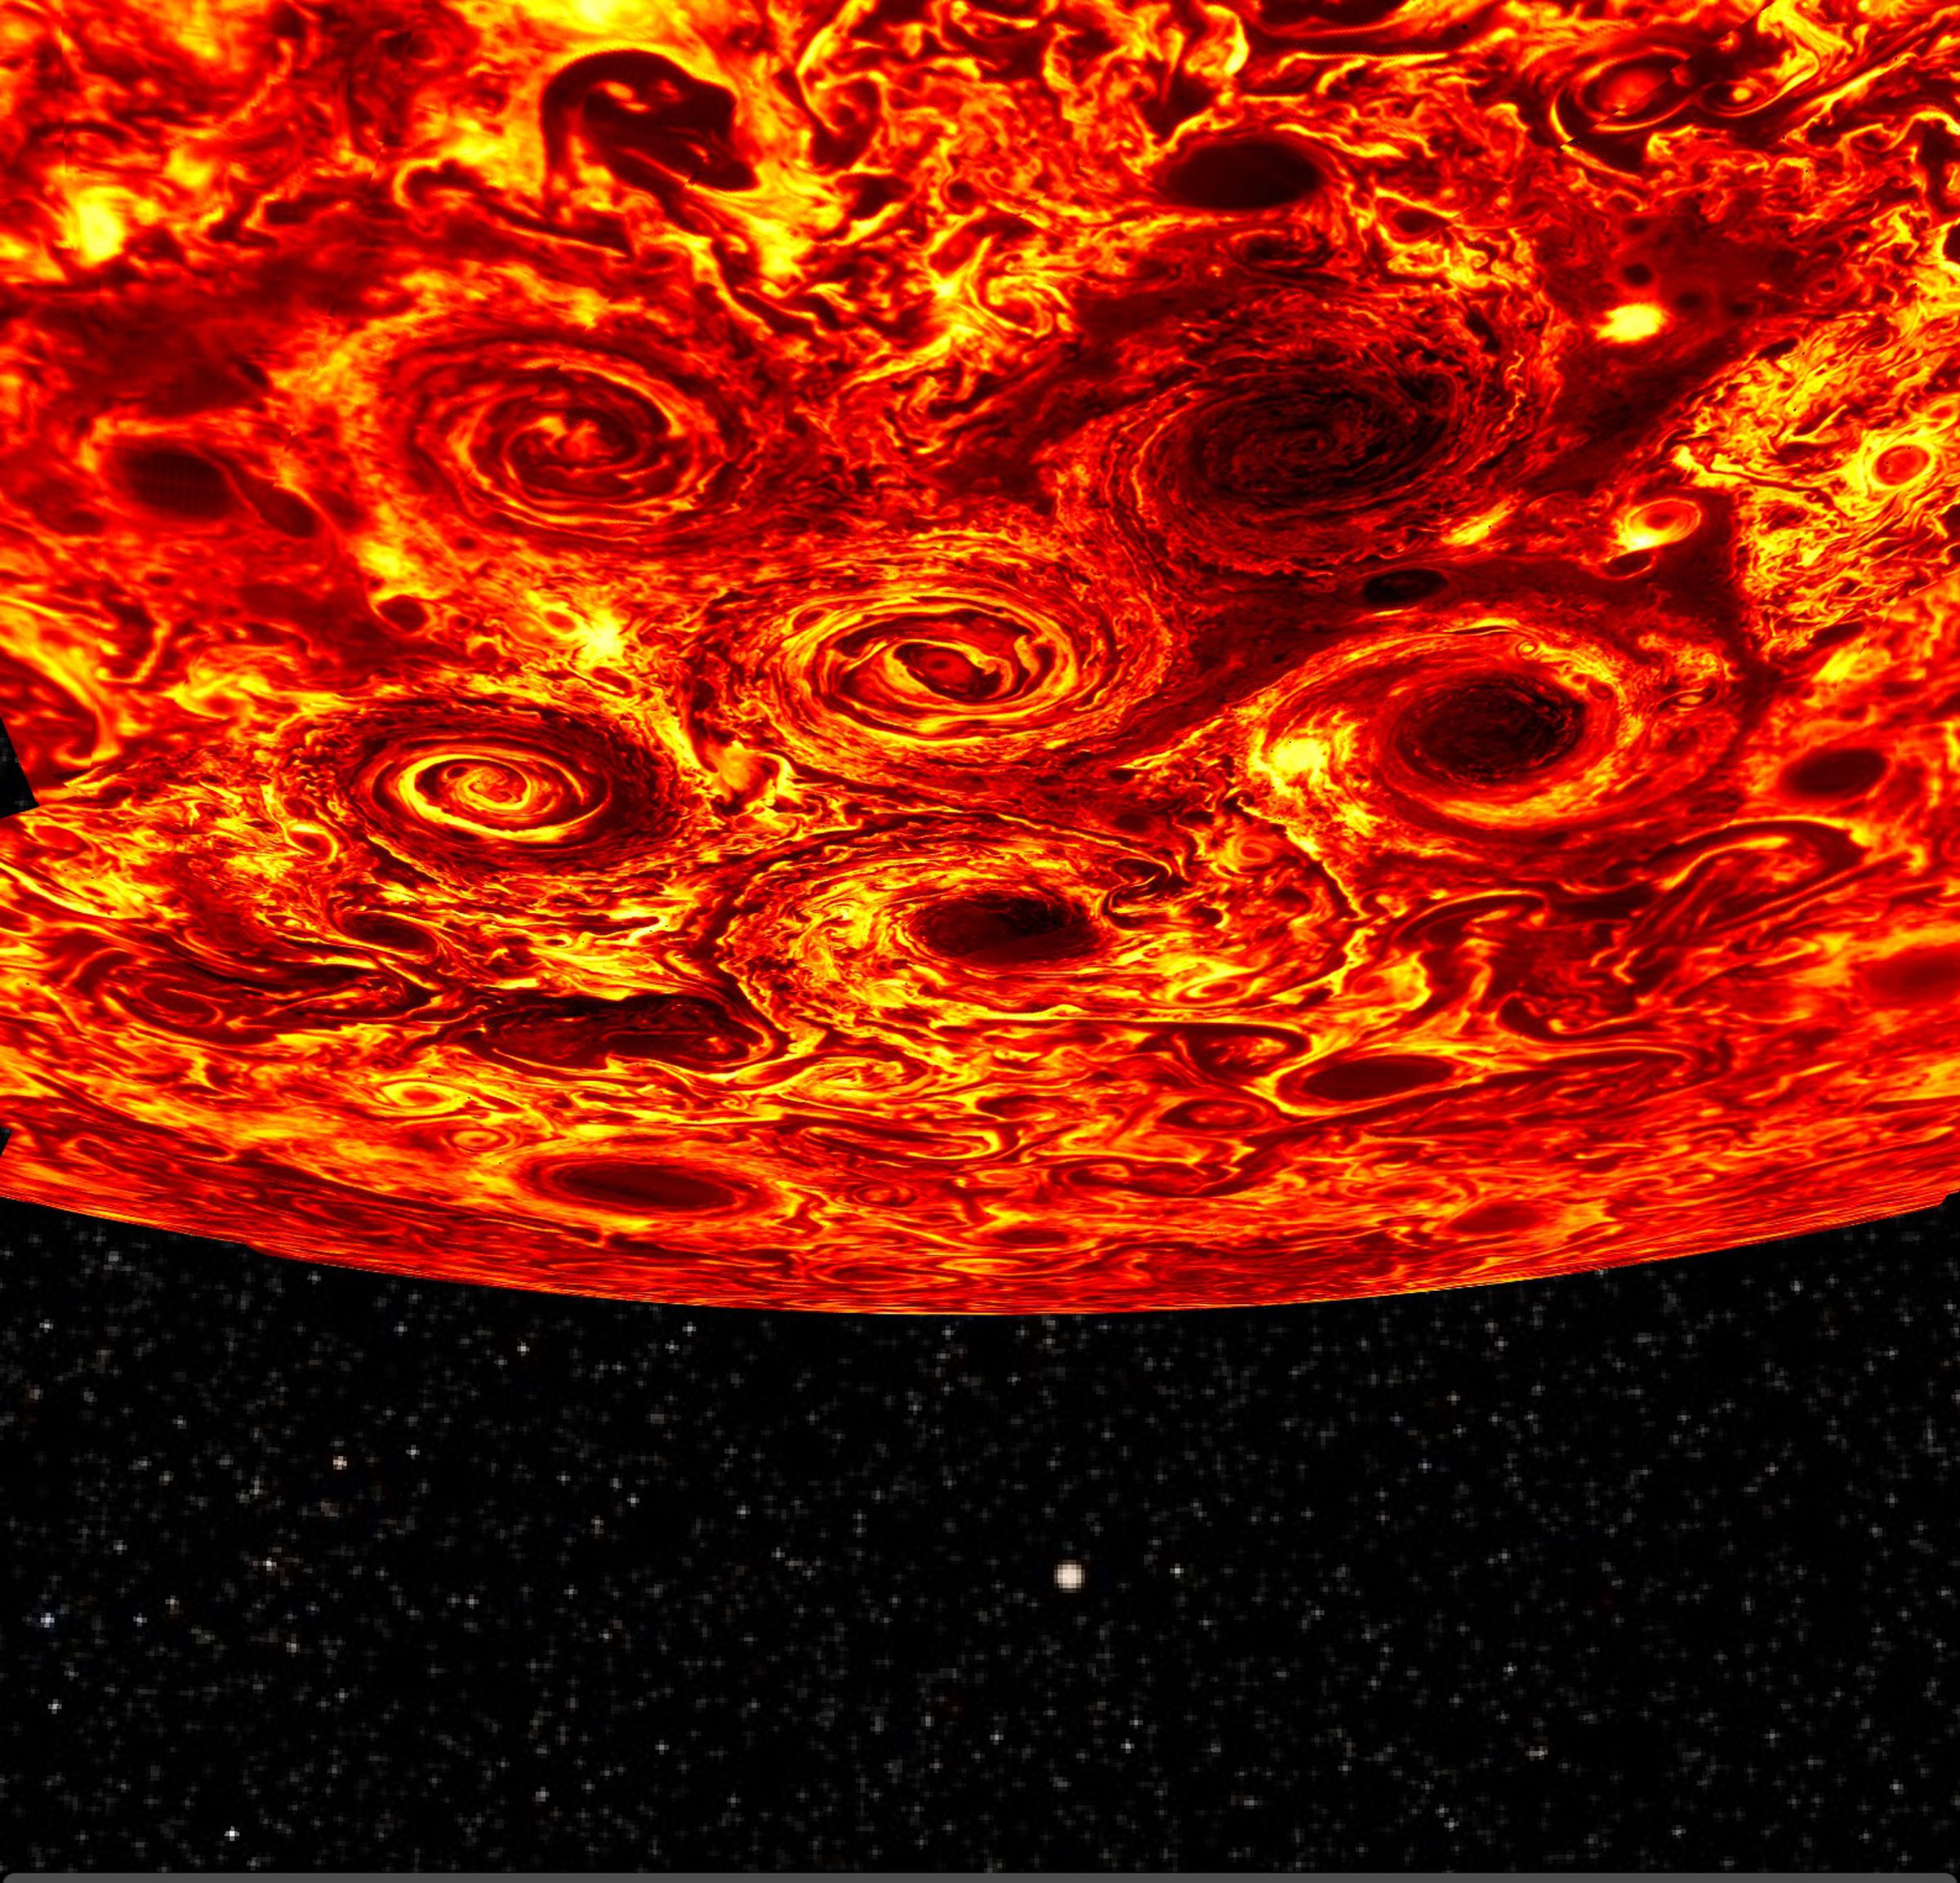 A mosaic of Jupiter’s south pole, seen in infrared from Juno.